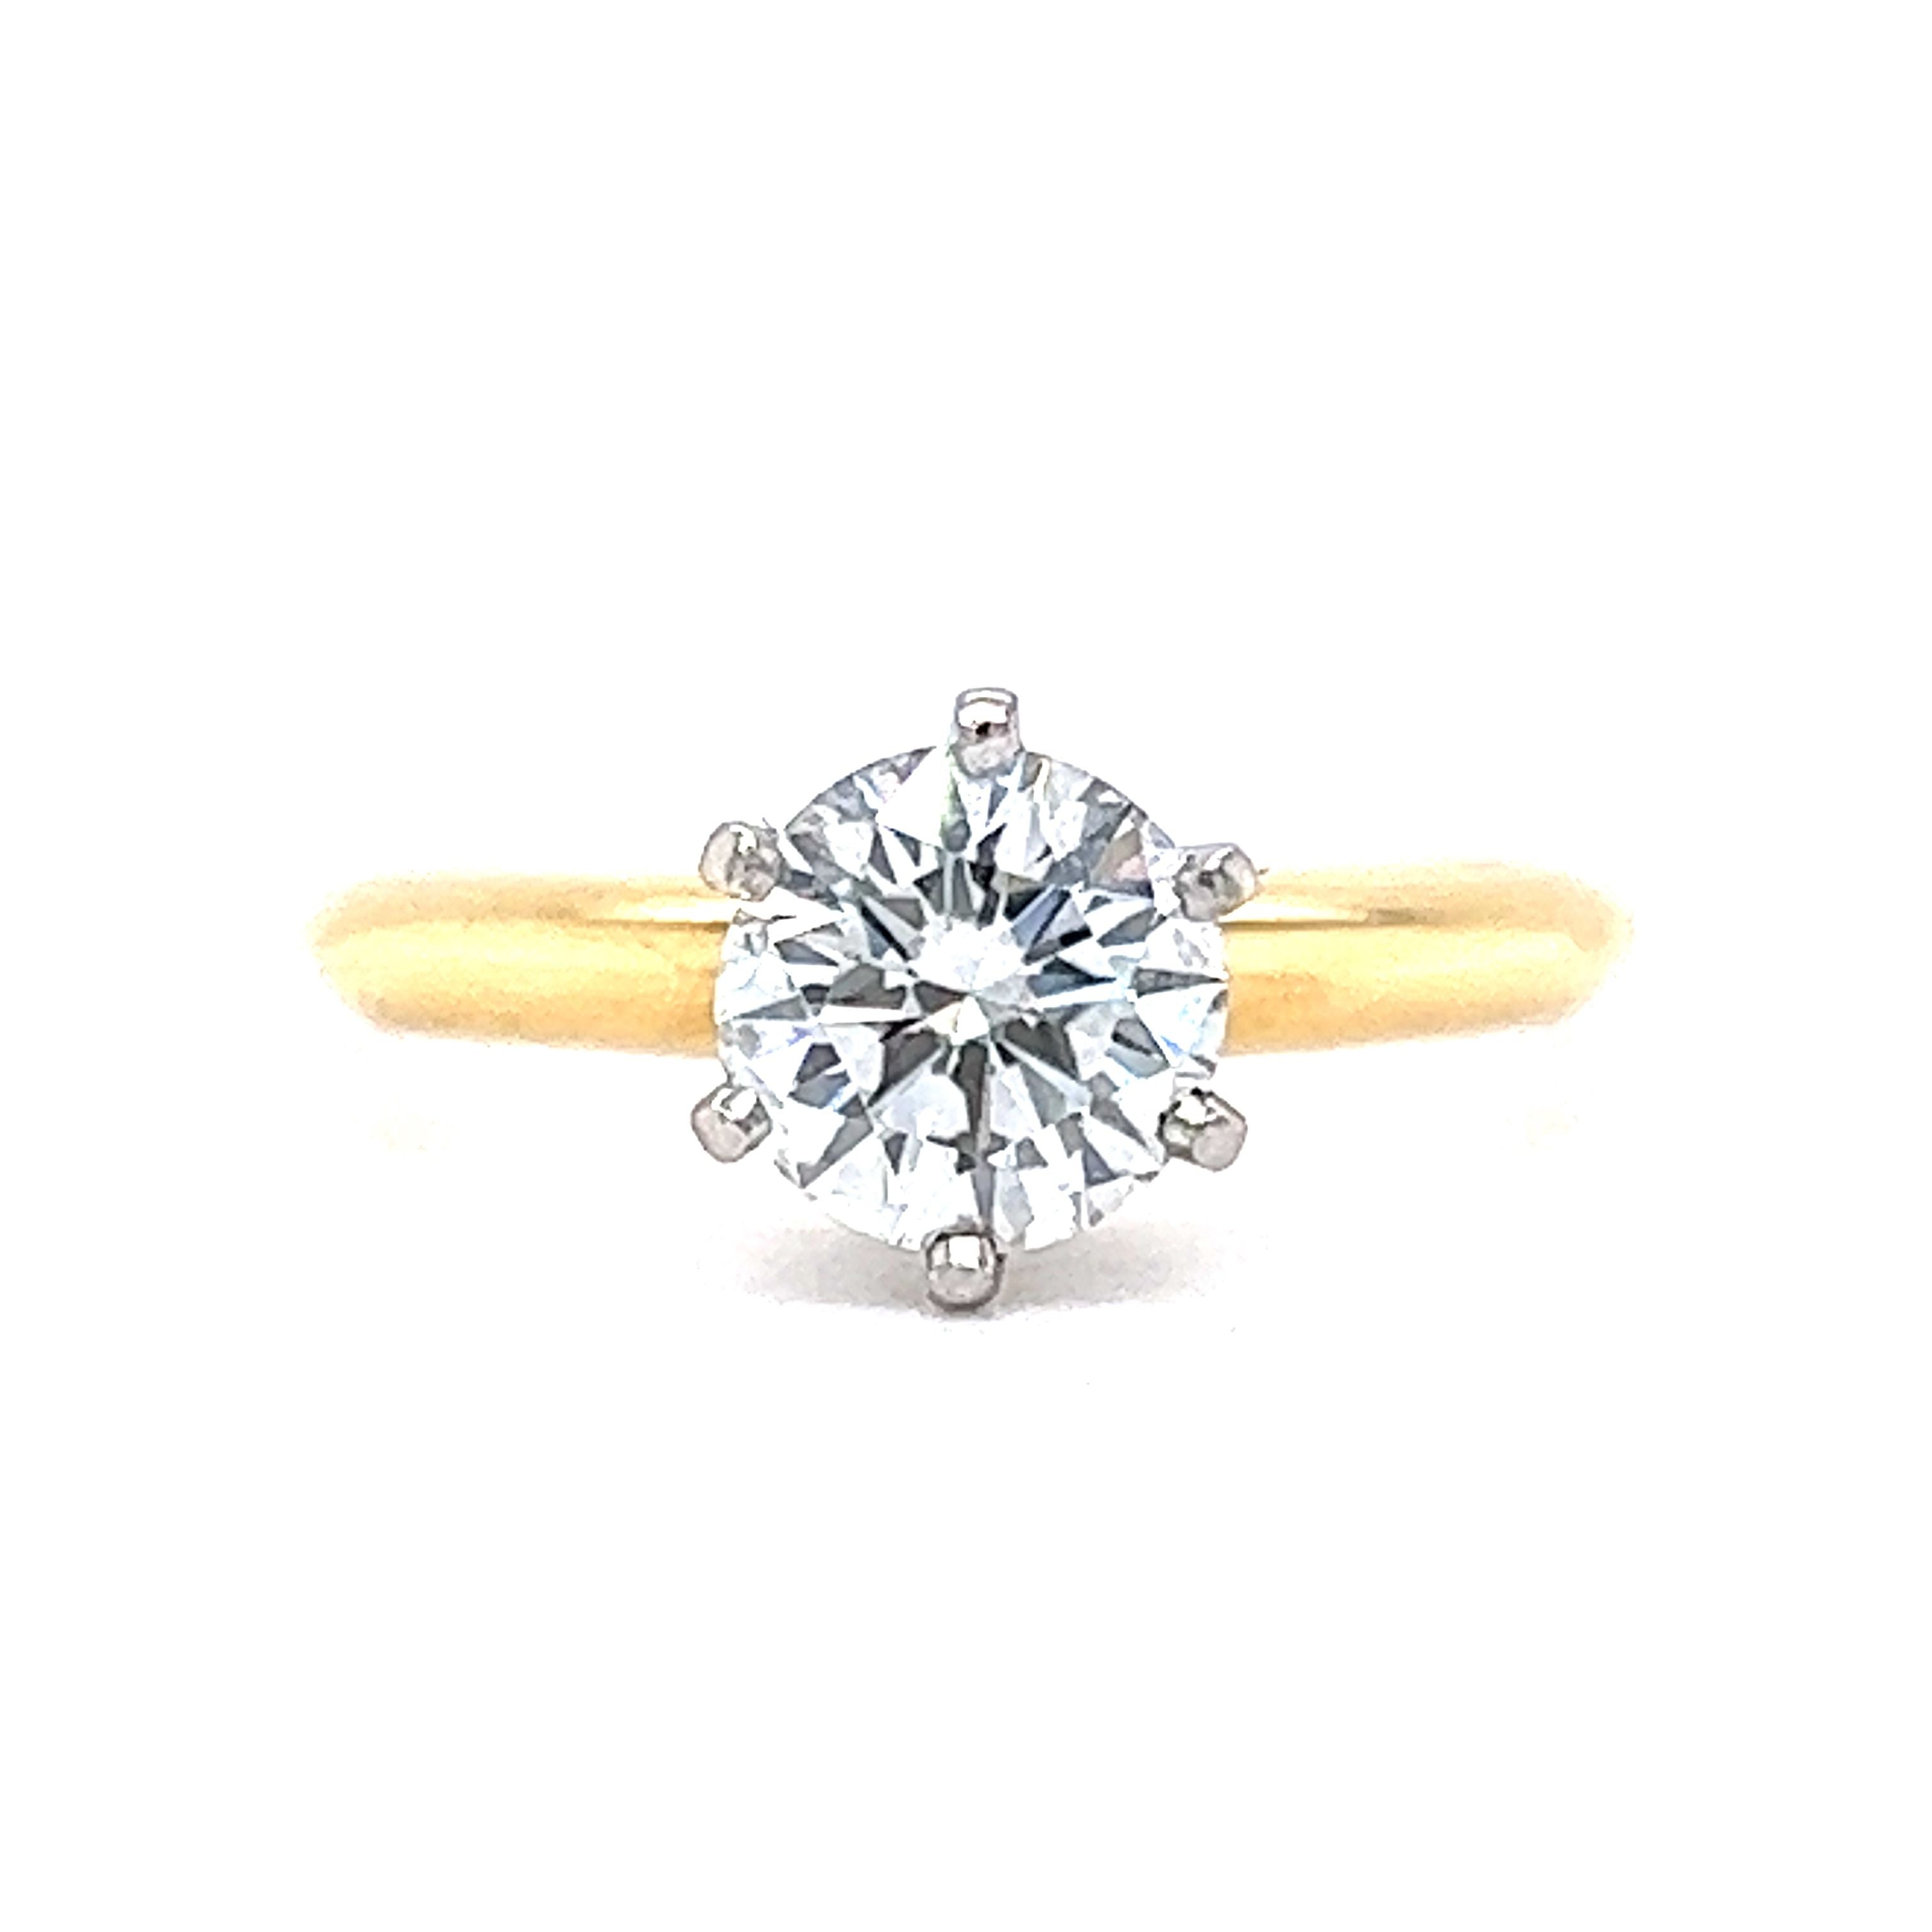 Tiffany & Co. Engagement Rings | Pre-Owned / Used Classic Rings Price | Tiffany's  Diamond and Gold Rings for Women | Page 2 | The Diamond Oak